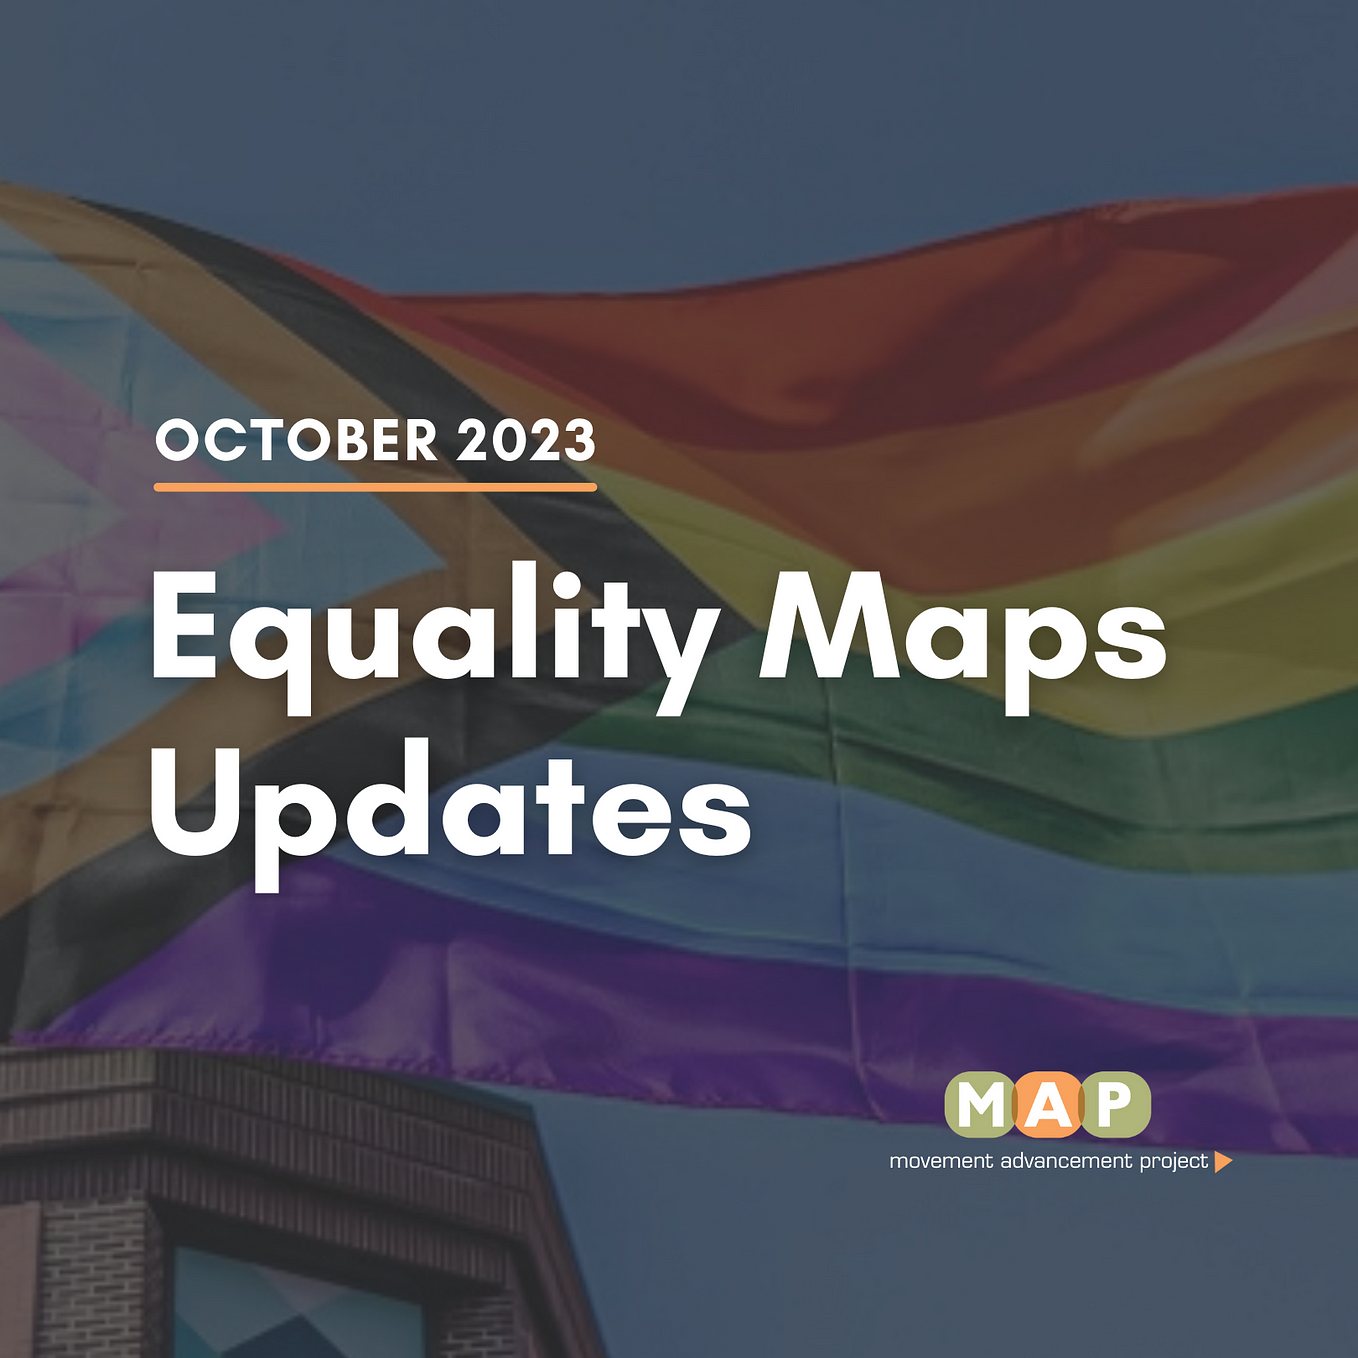 LGBTQ Equality Maps Updates: October 2023